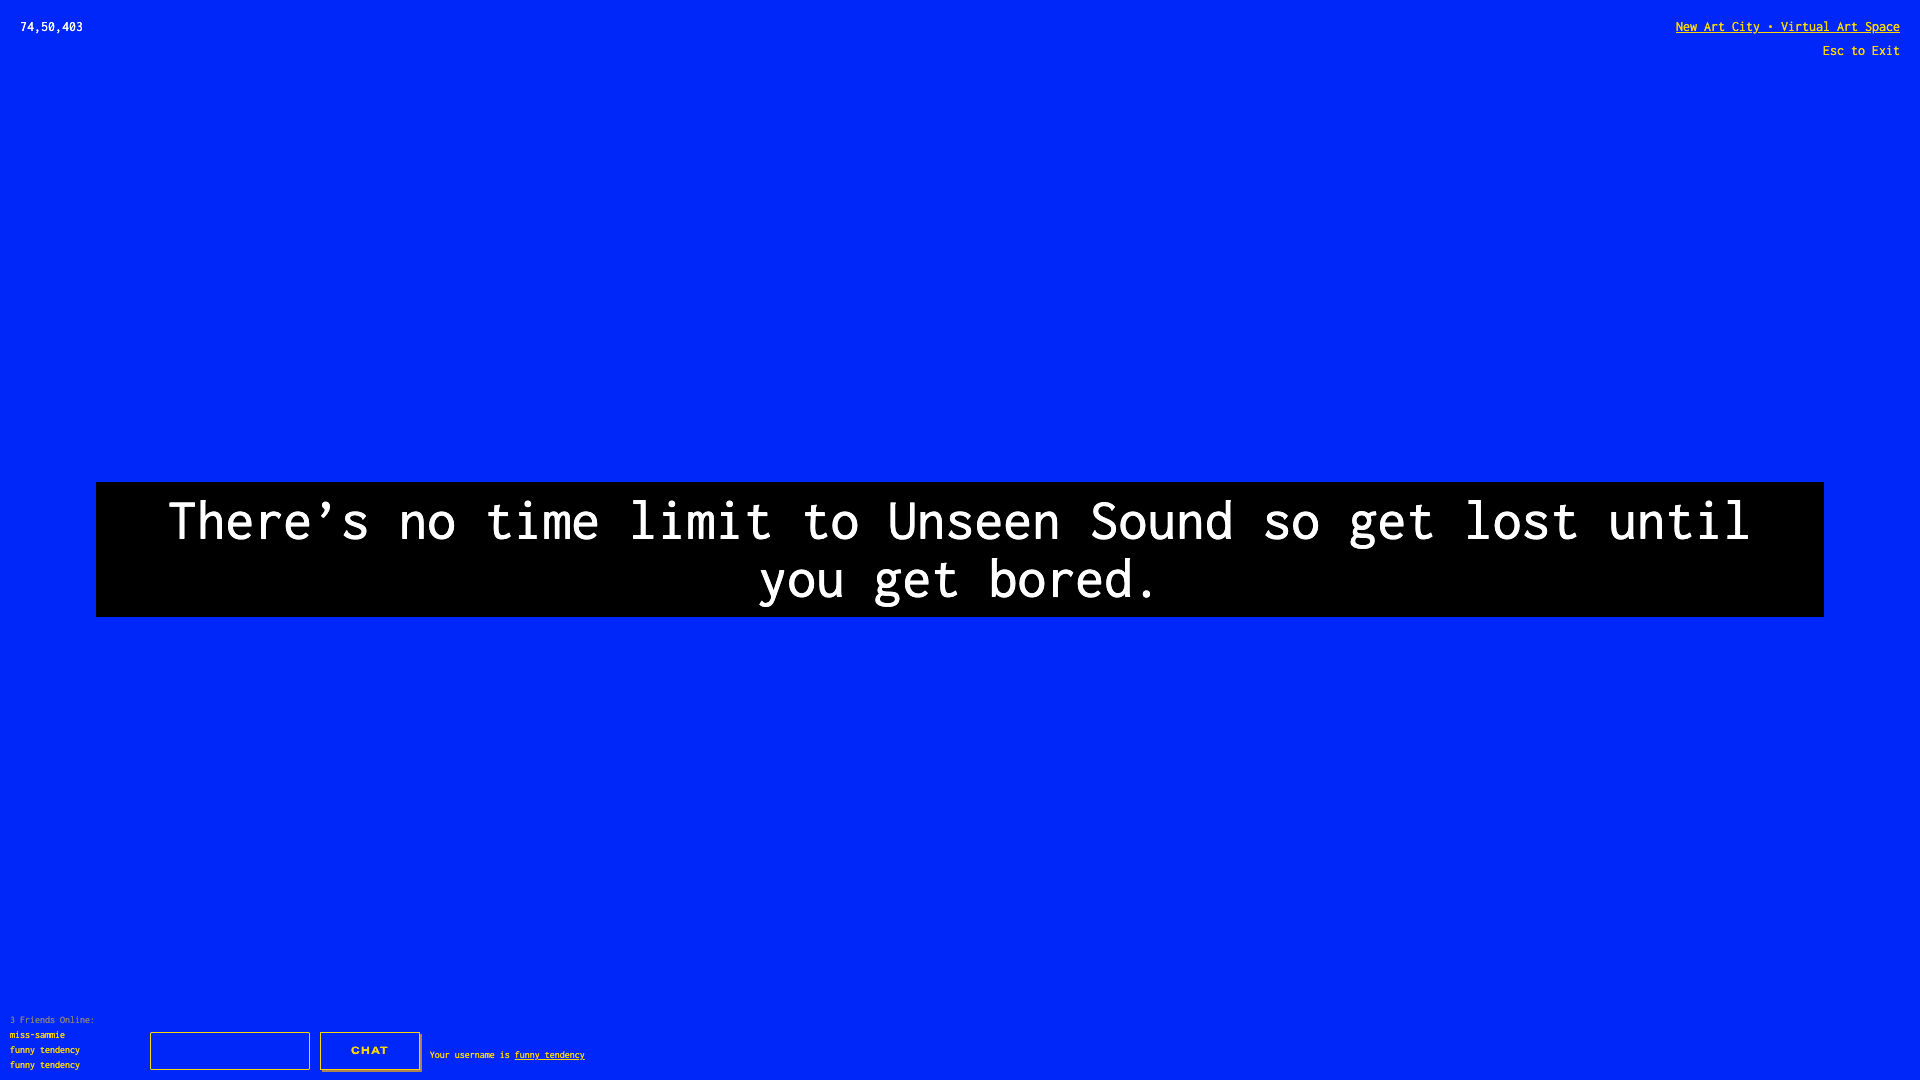 Deep blue screenshot, in the middle white text on a black box reads "There's no time limit to Unseen Sound so get lost until you get bored."